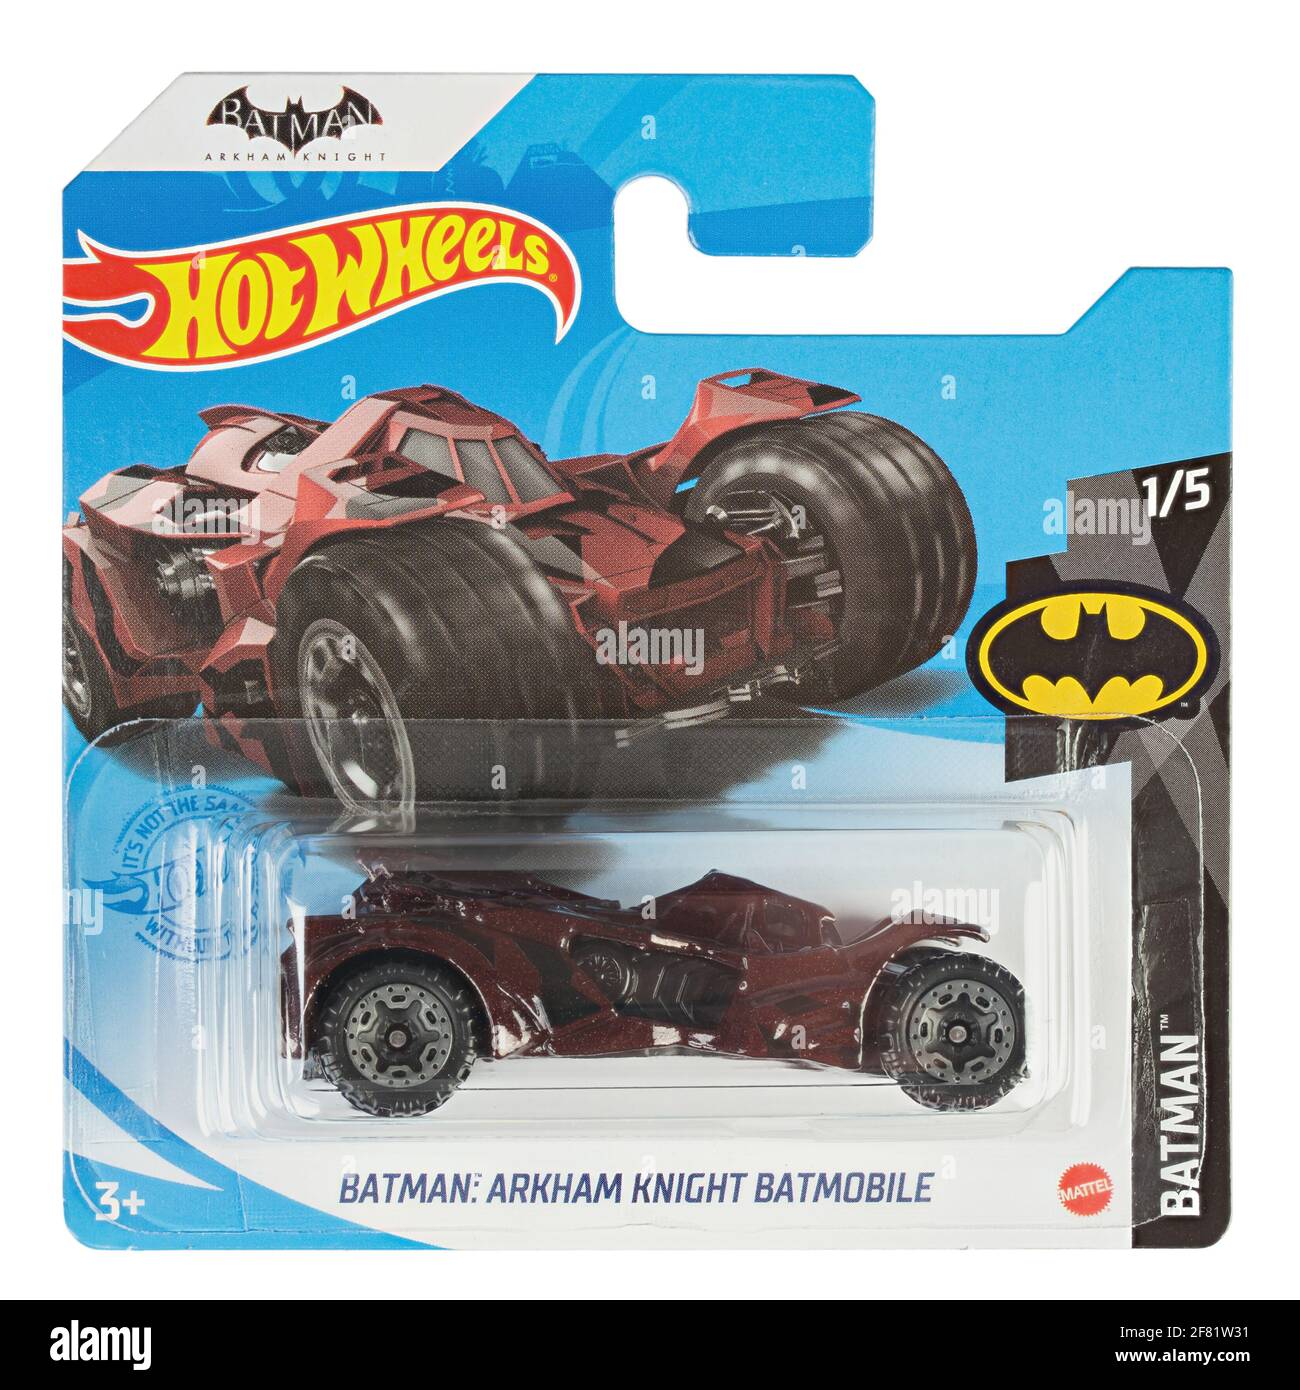 Ukraine, Kyiv - April 05. 2021: Hot wheels toy car  Batman: Arkham knight batmobile close up picture. Wheels is a scale die-cast toy cars by American Stock Photo